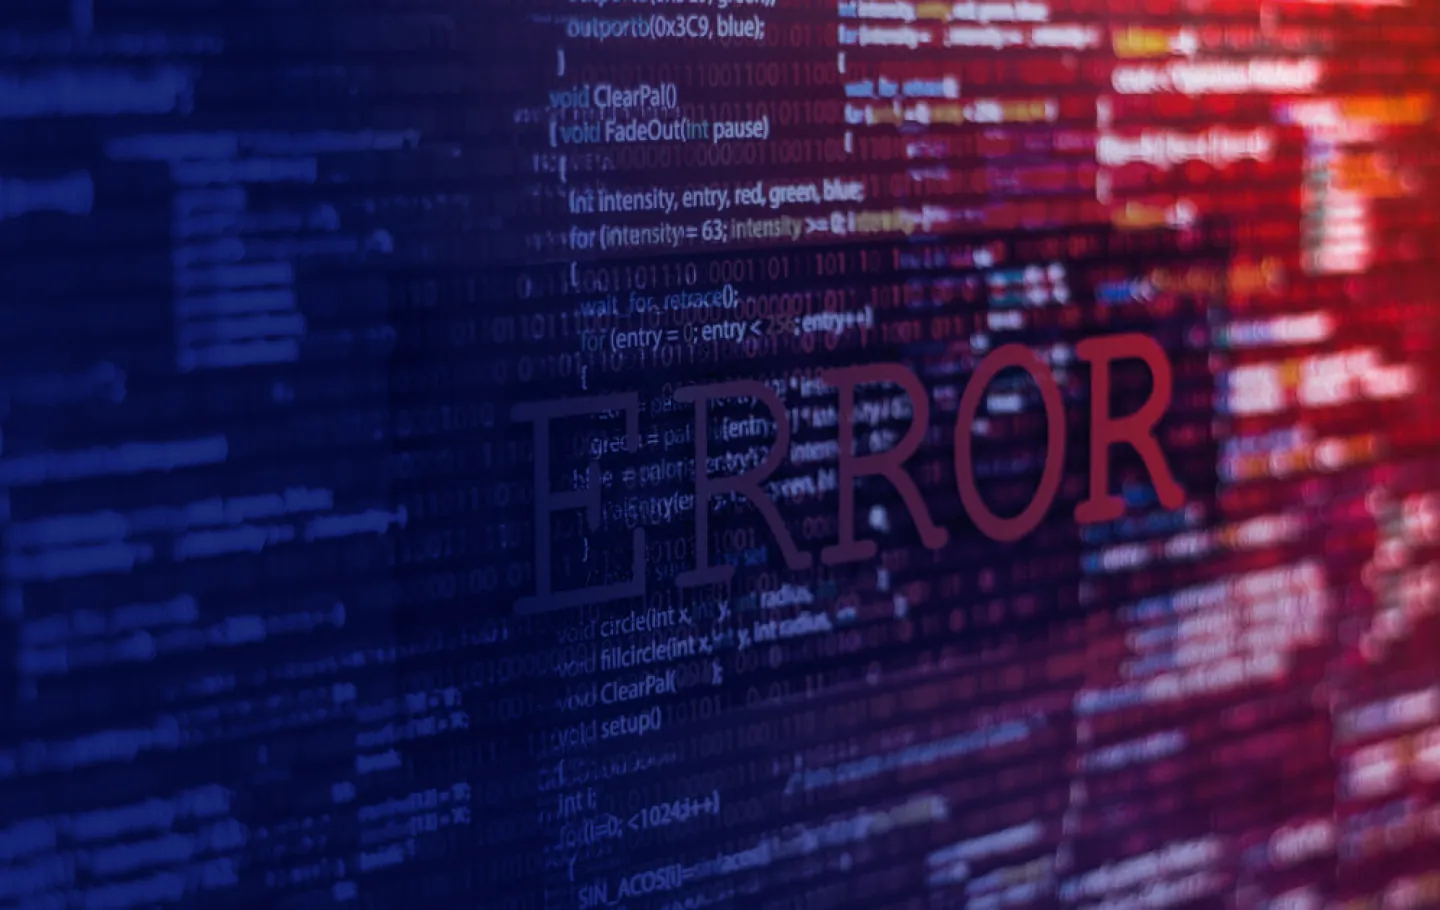 Red and blue image with some code on it and the word "error" overlayed.